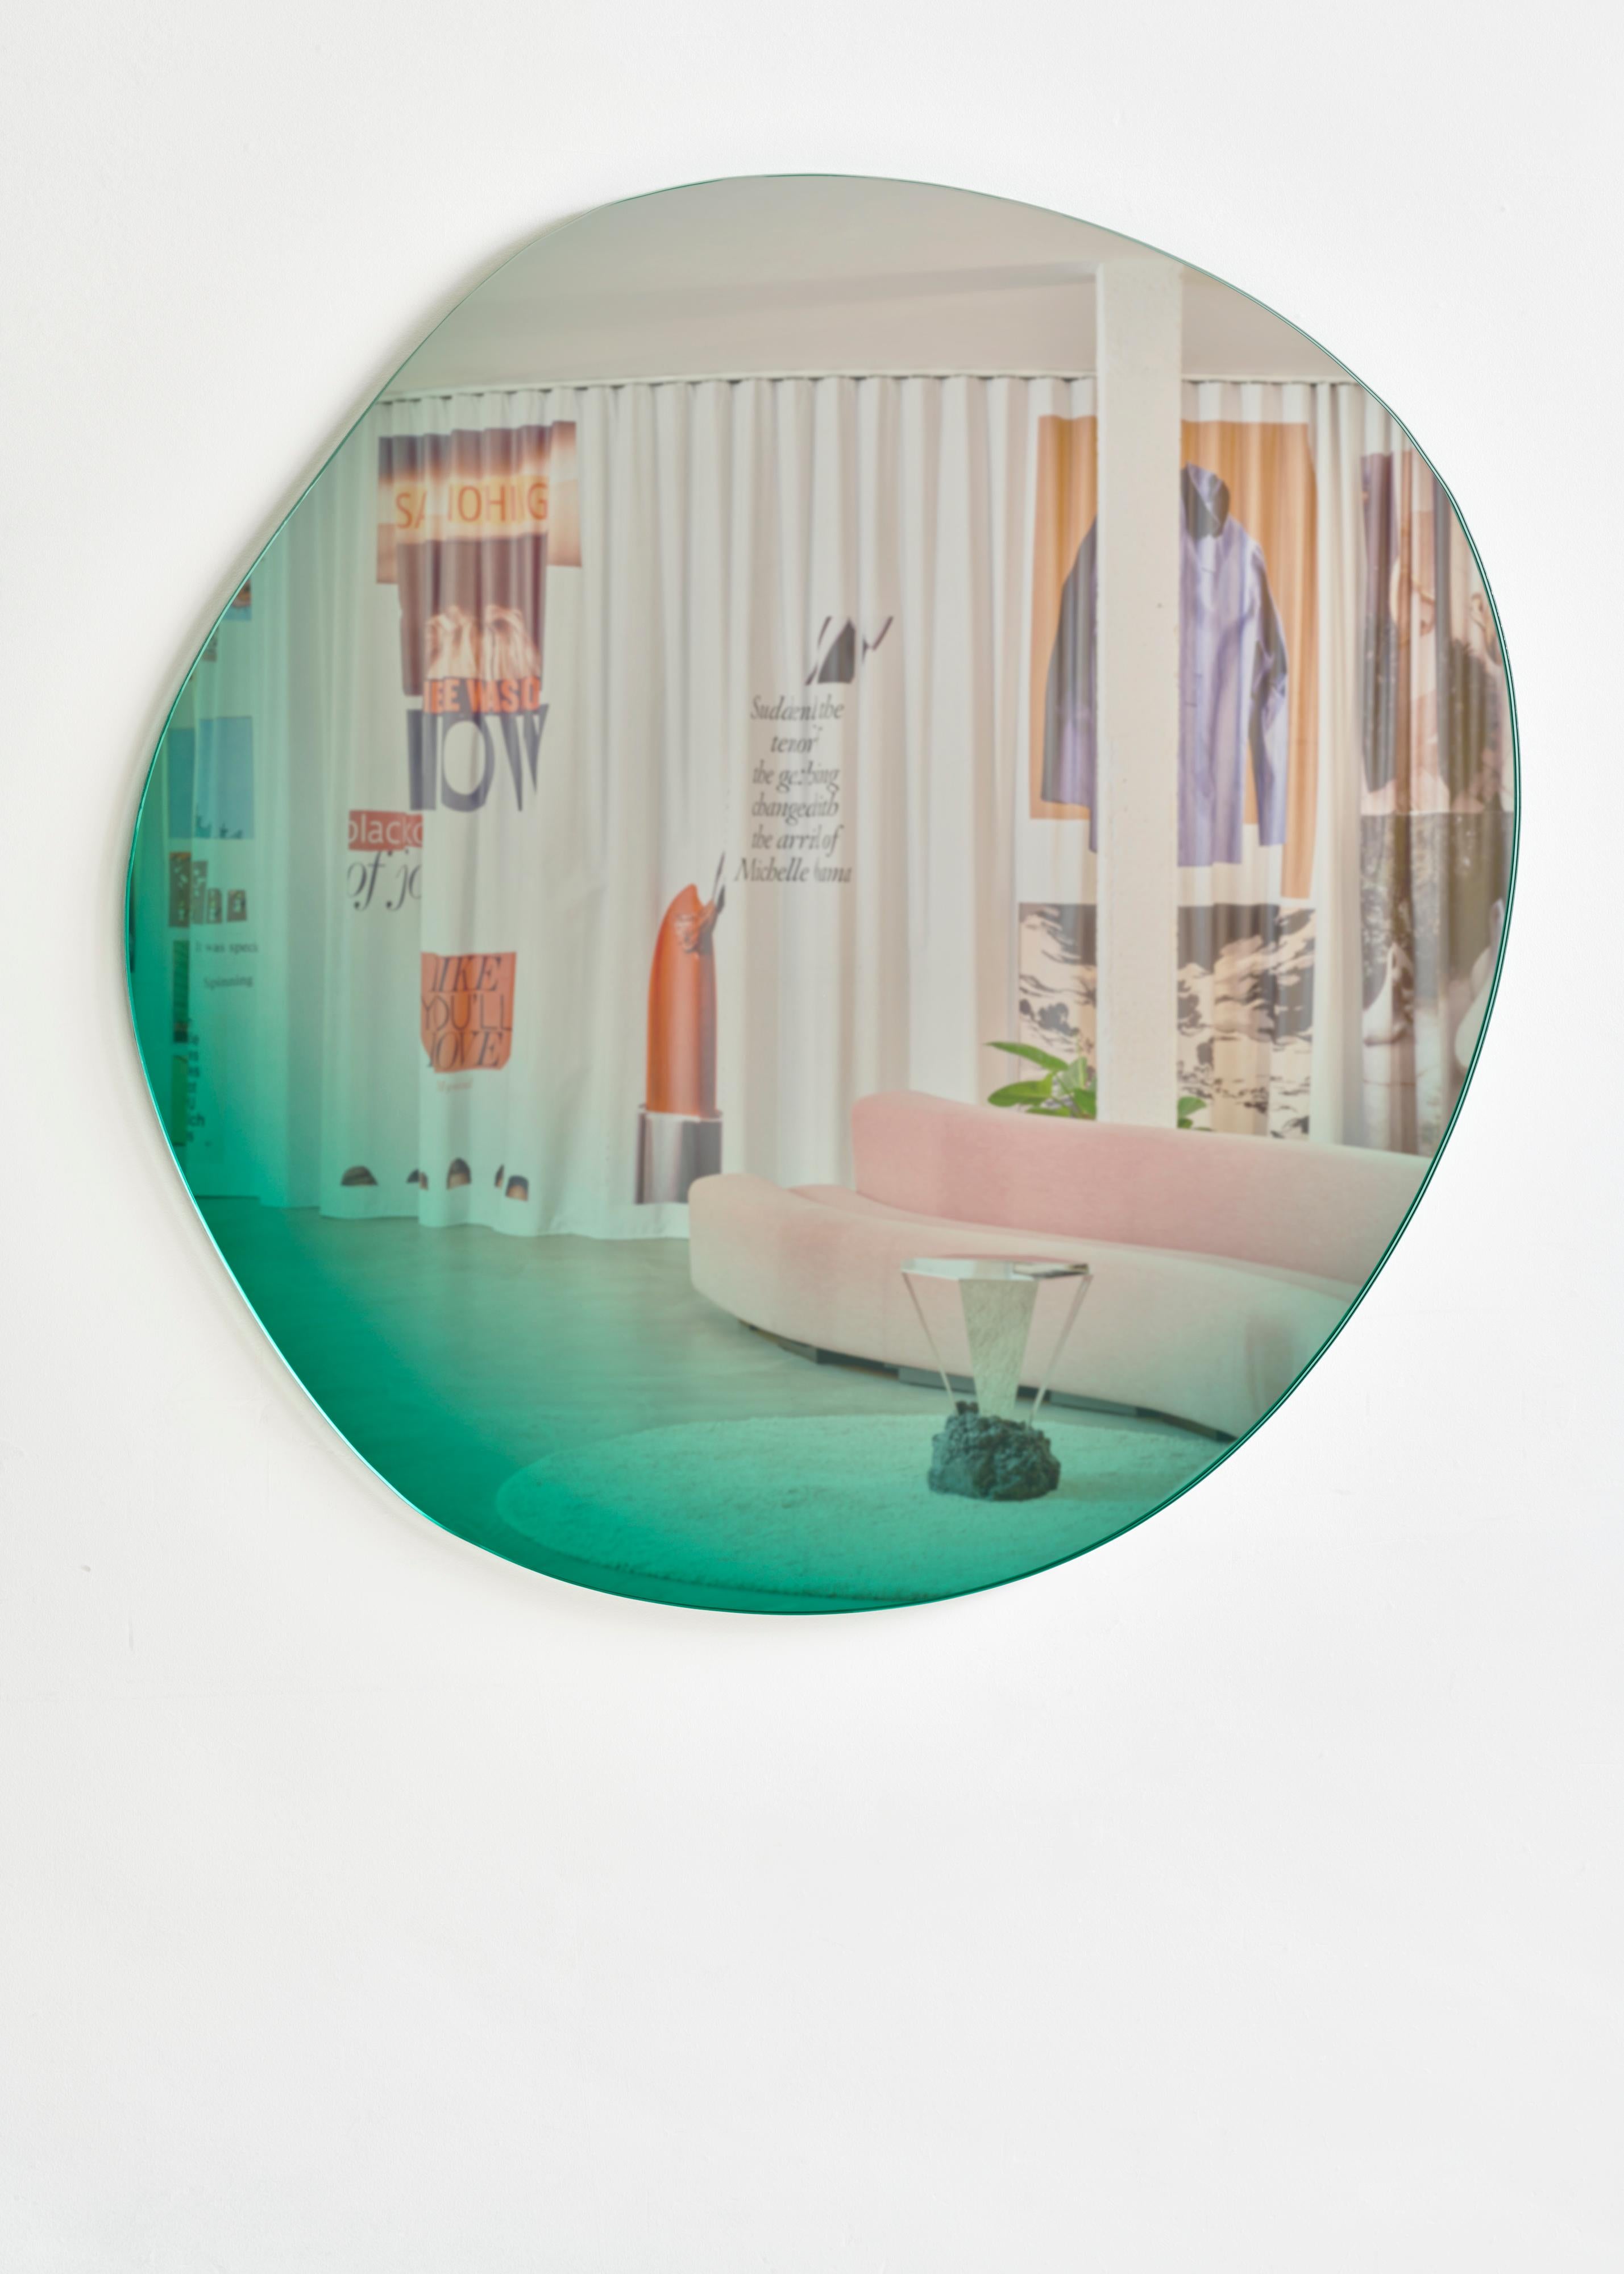 Latest design in the Off Round Hue mirror series

Sabine Marcelis and Brit van Nerven collaborated on the project ‘Seeing Glass’ - a series of glass objects resulting from an ongoing study into optical effects created with glass as the primary